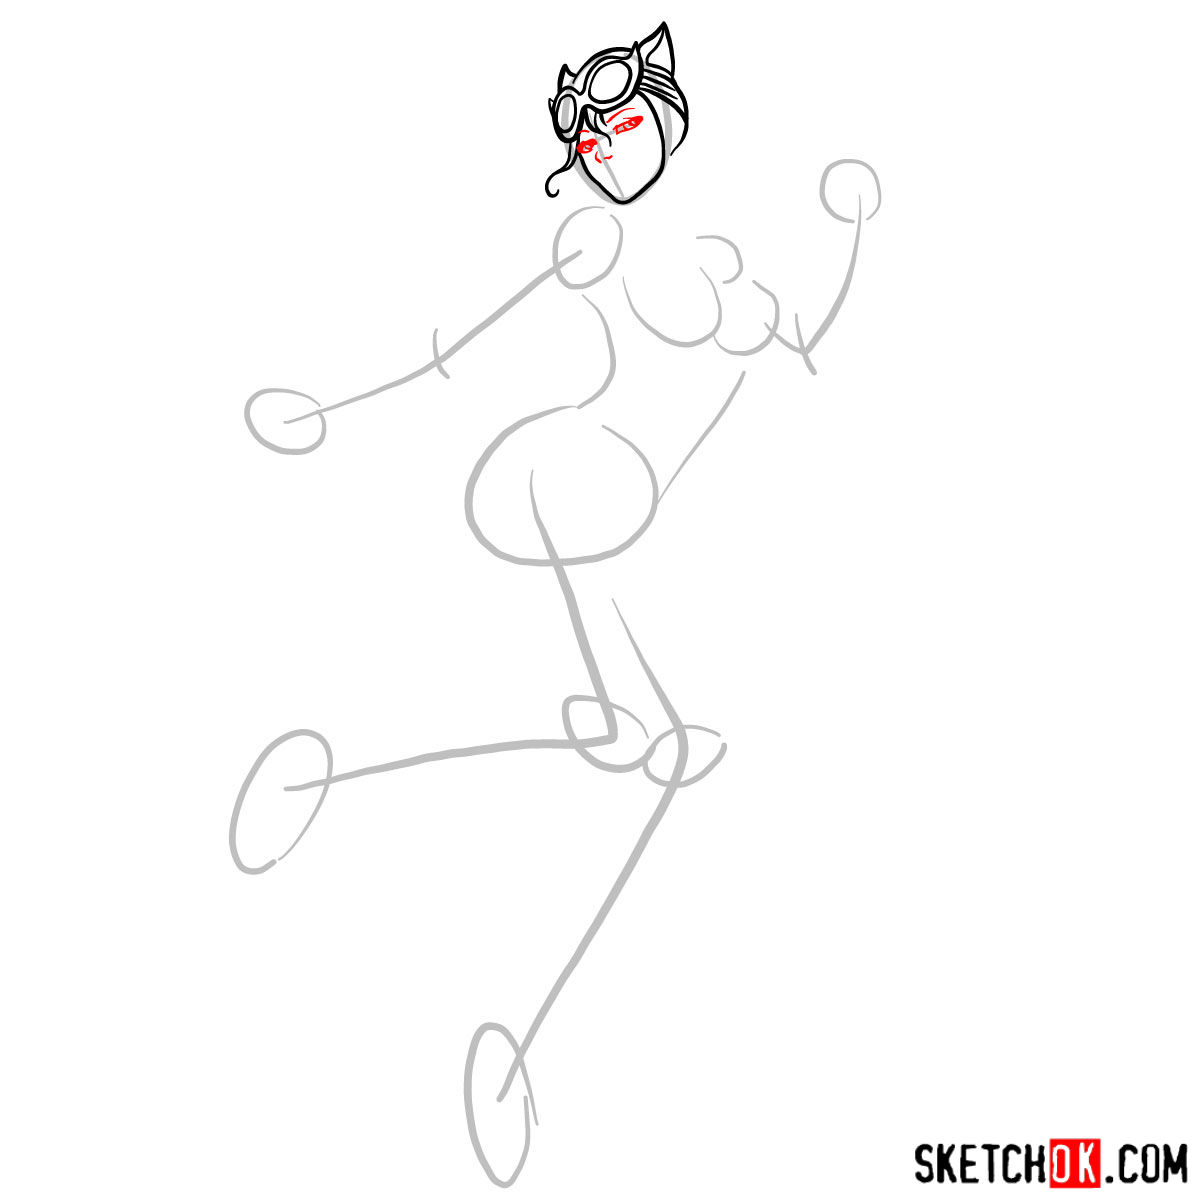 How to draw Catwoman superheroine from DC Comics - step 04